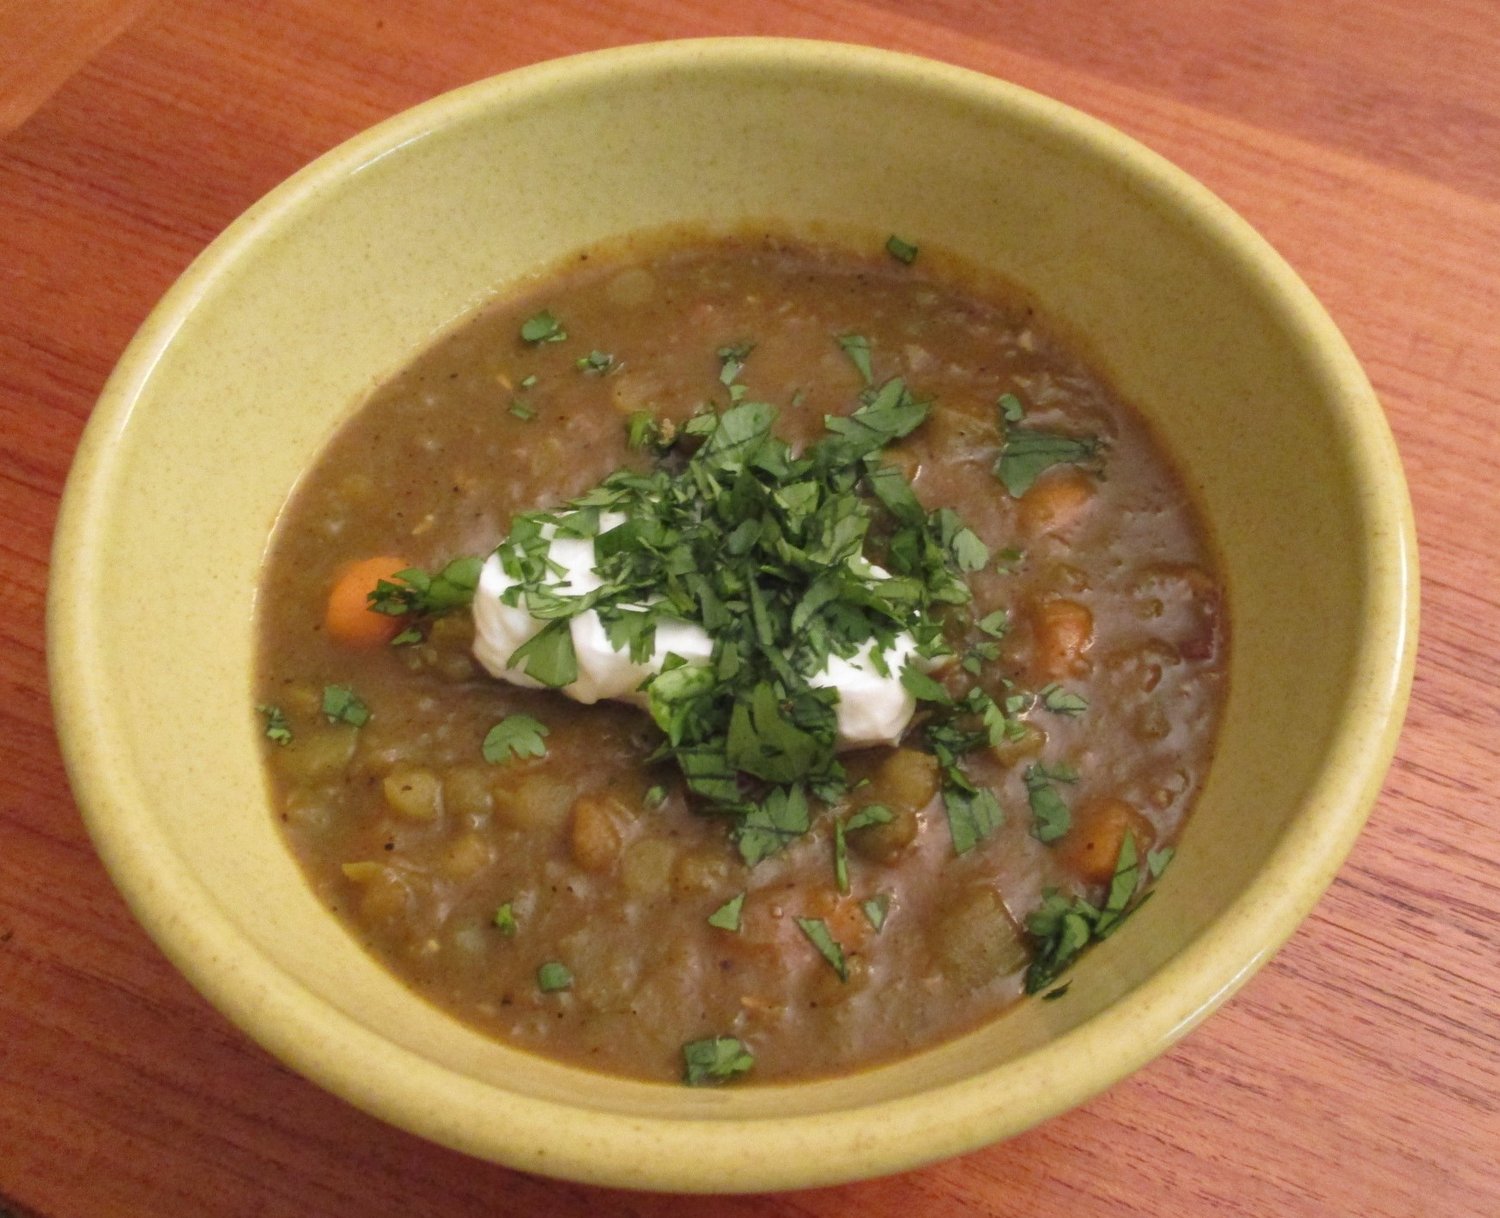 Curried split pea soup with a dollop of yogurt and cilantro garnish.